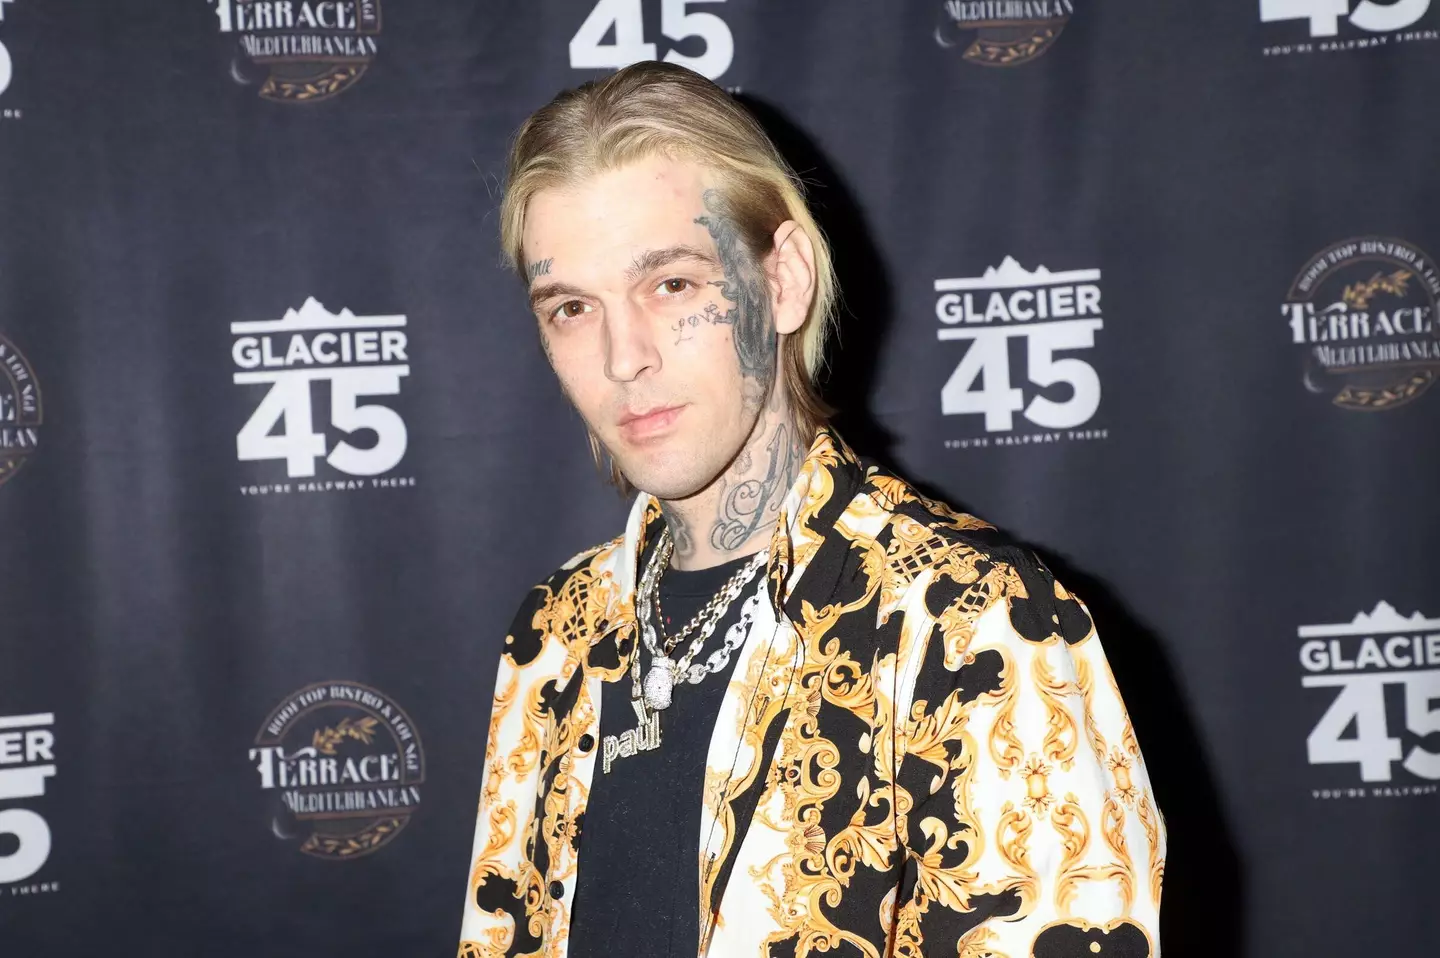 It was recently announced that Aaron Carter’s unfinished memoir will be released posthumously later this month.